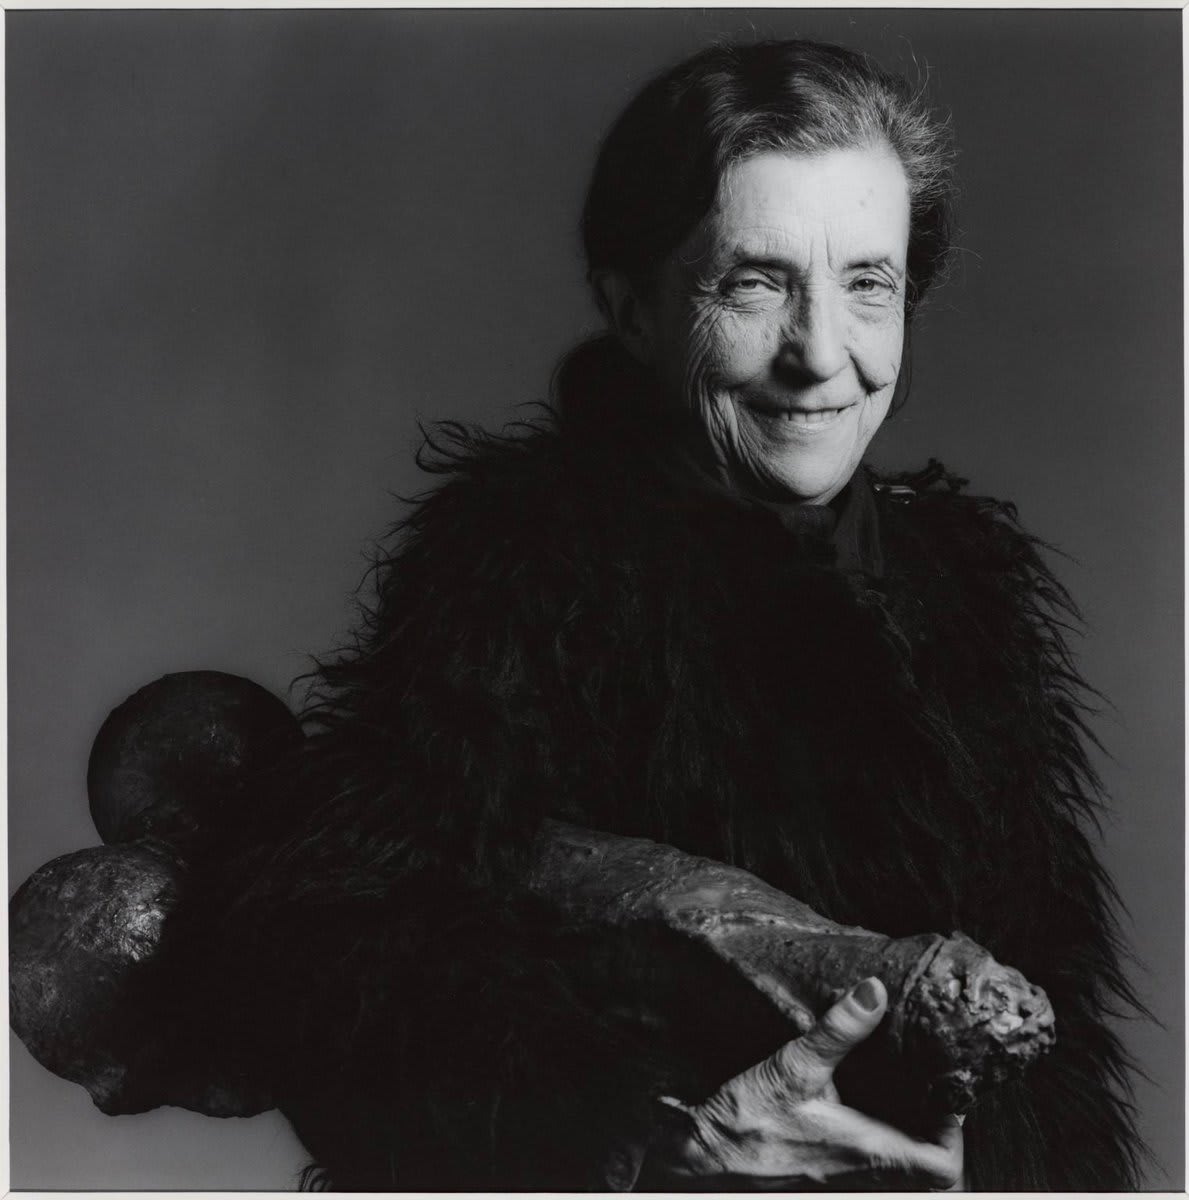 'Tell your own story, and you will be interesting.' - Louise Bourgeois The artist and her work 🍆 photographed by Robert Mapplethorpe in 1982.